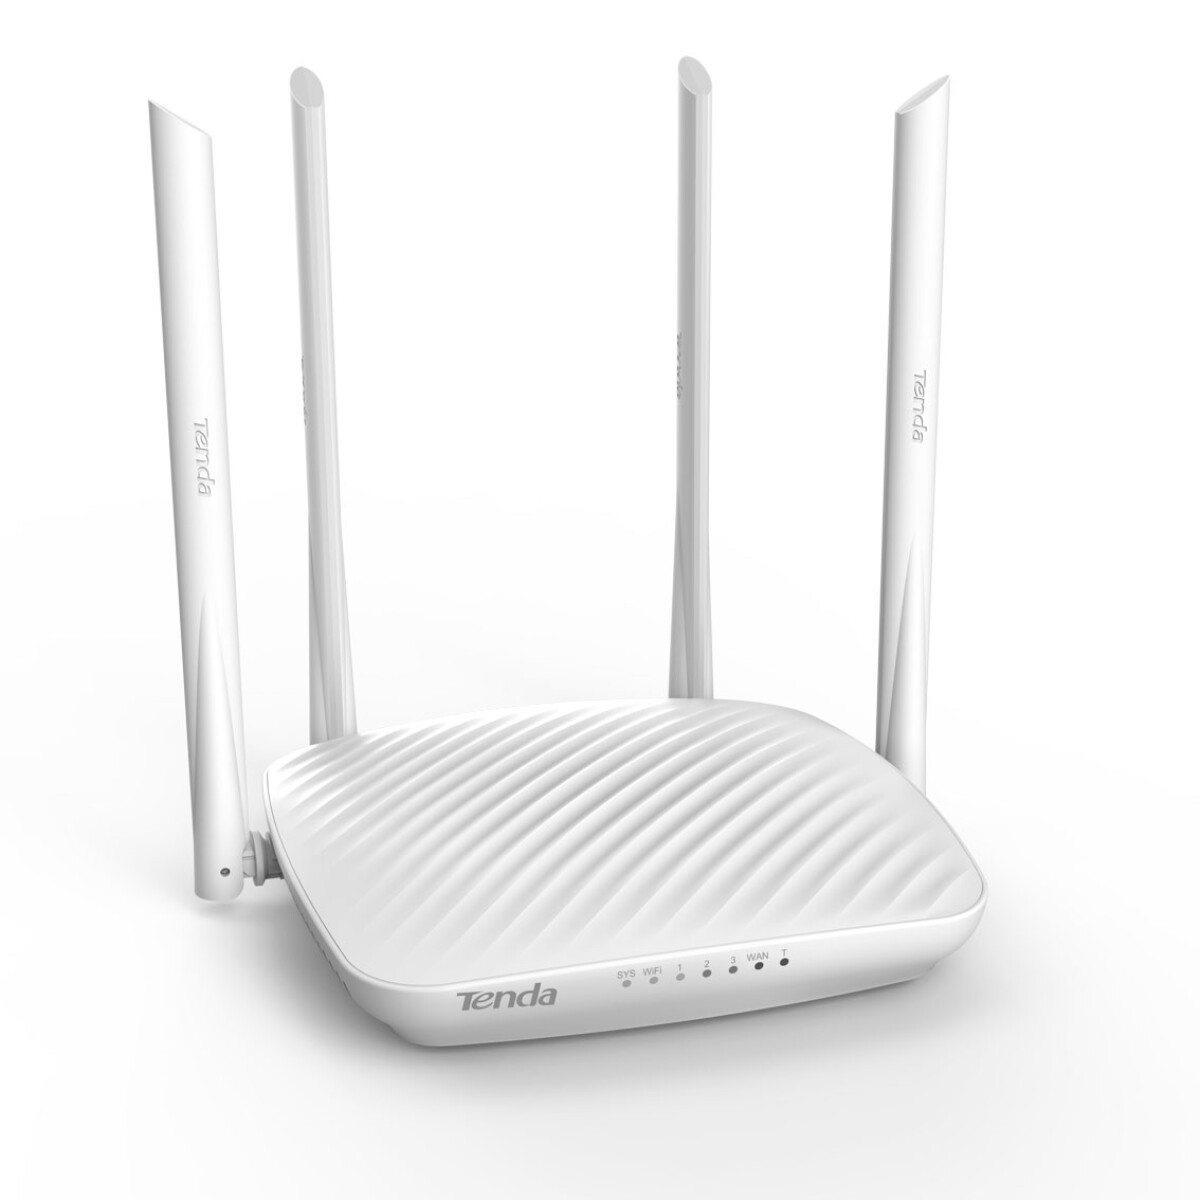 Router Wifi Tenda F9 600MBPS - 001 